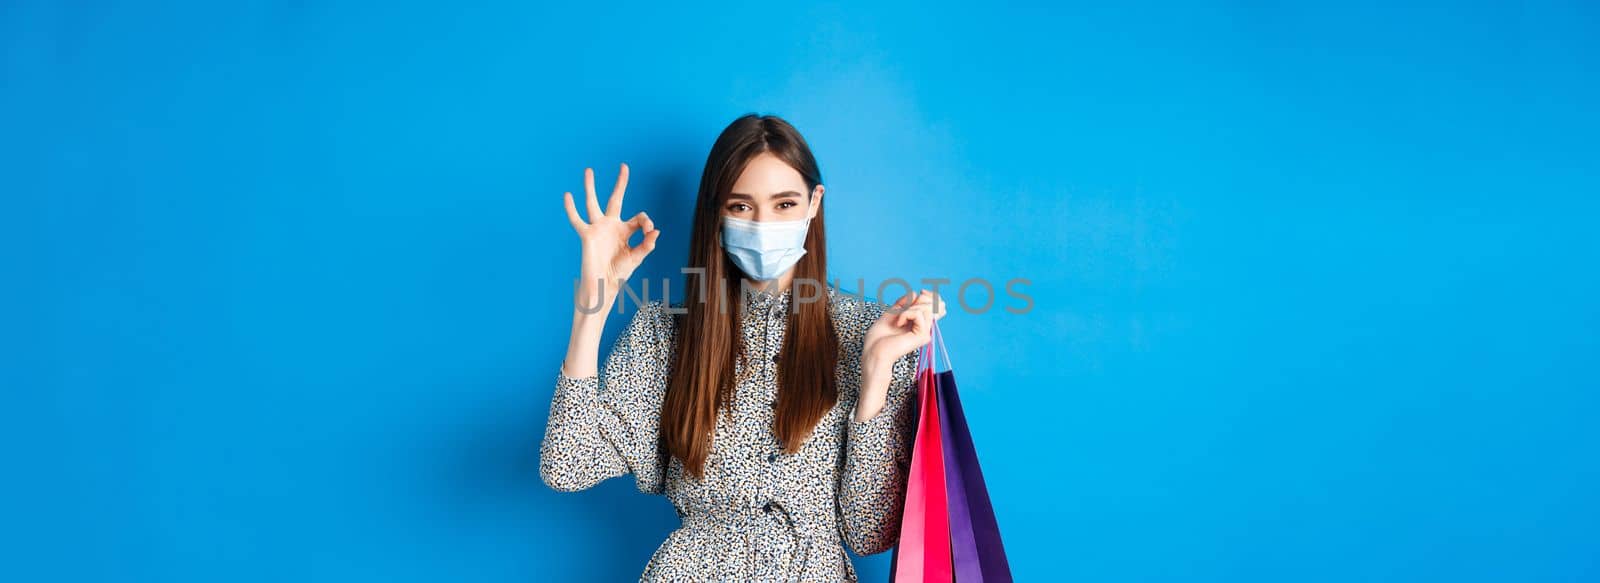 Covid-19, pandemic and lifestyle concept. Attractive woman wear medical mask on shopping, show okay and hold bags with purchases, blue background.